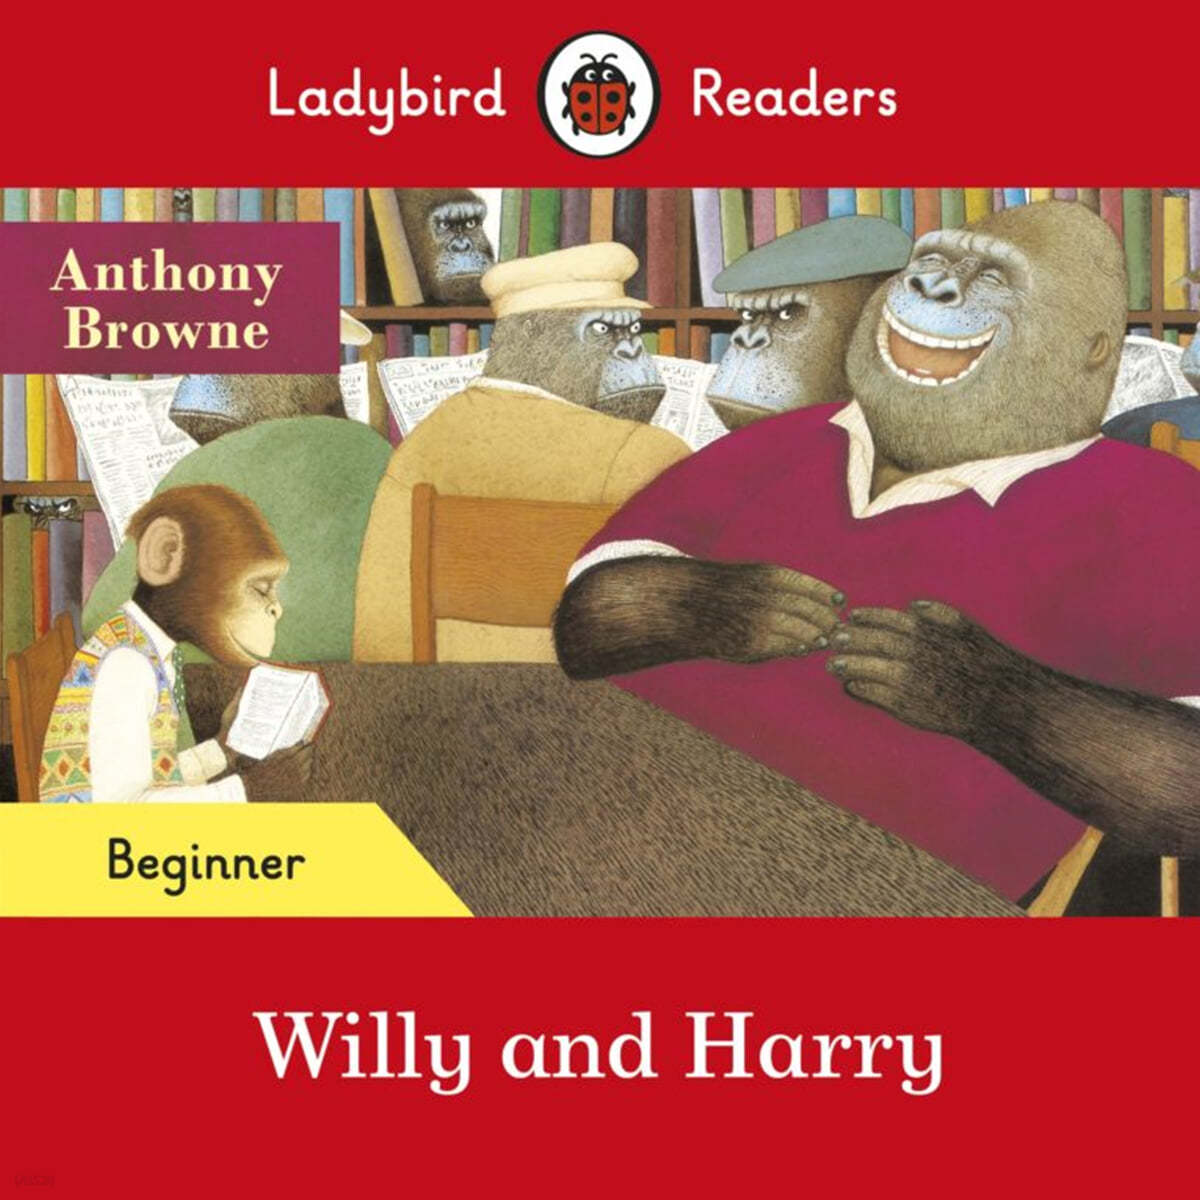 Ladybird Readers Beginner : Anthony Browne - Willy and Harry